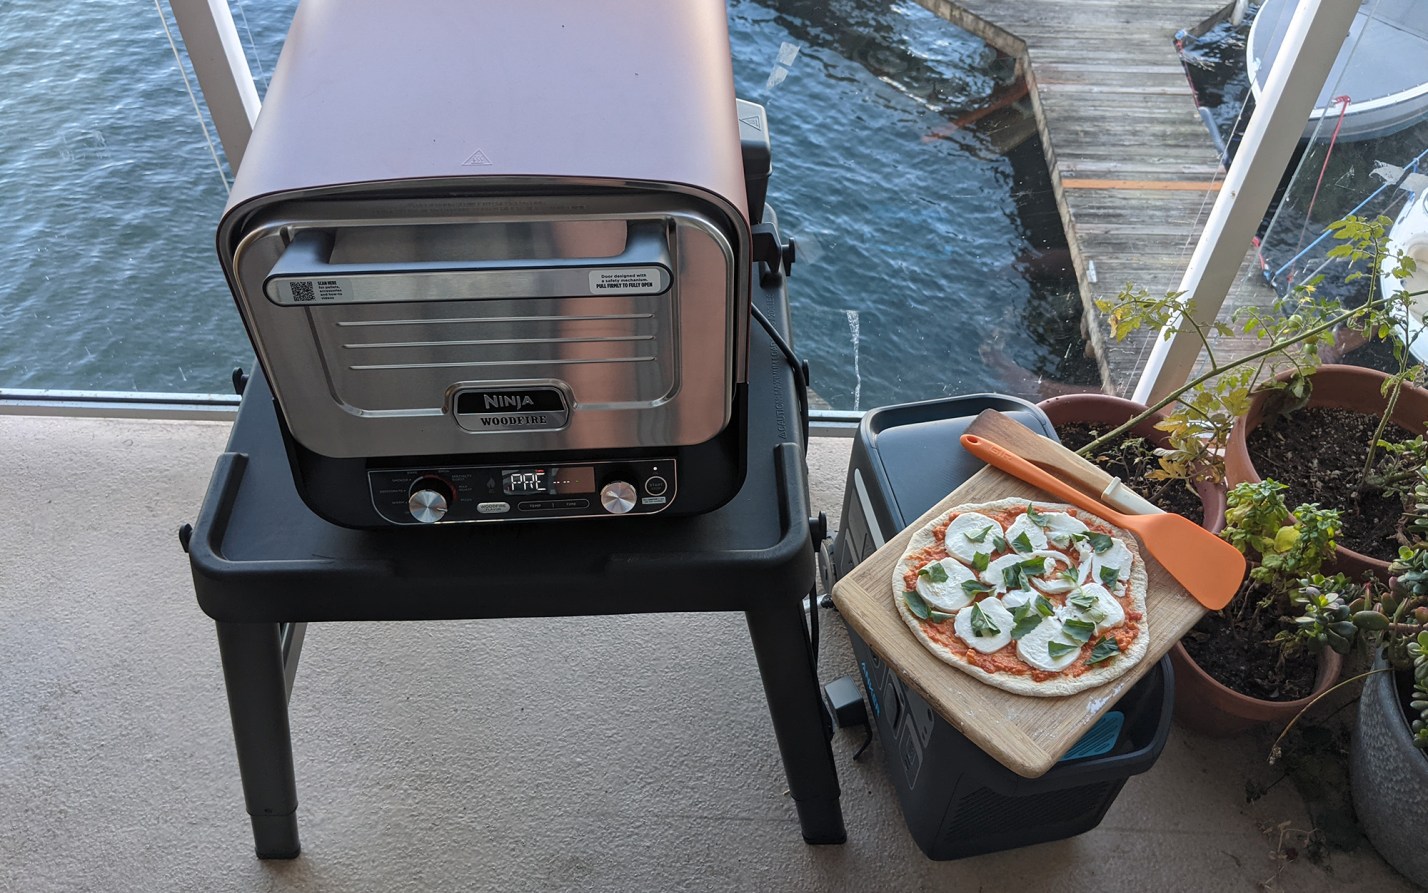 We tested the Ninja Woodfire 8-in-1 Outdoor Oven.